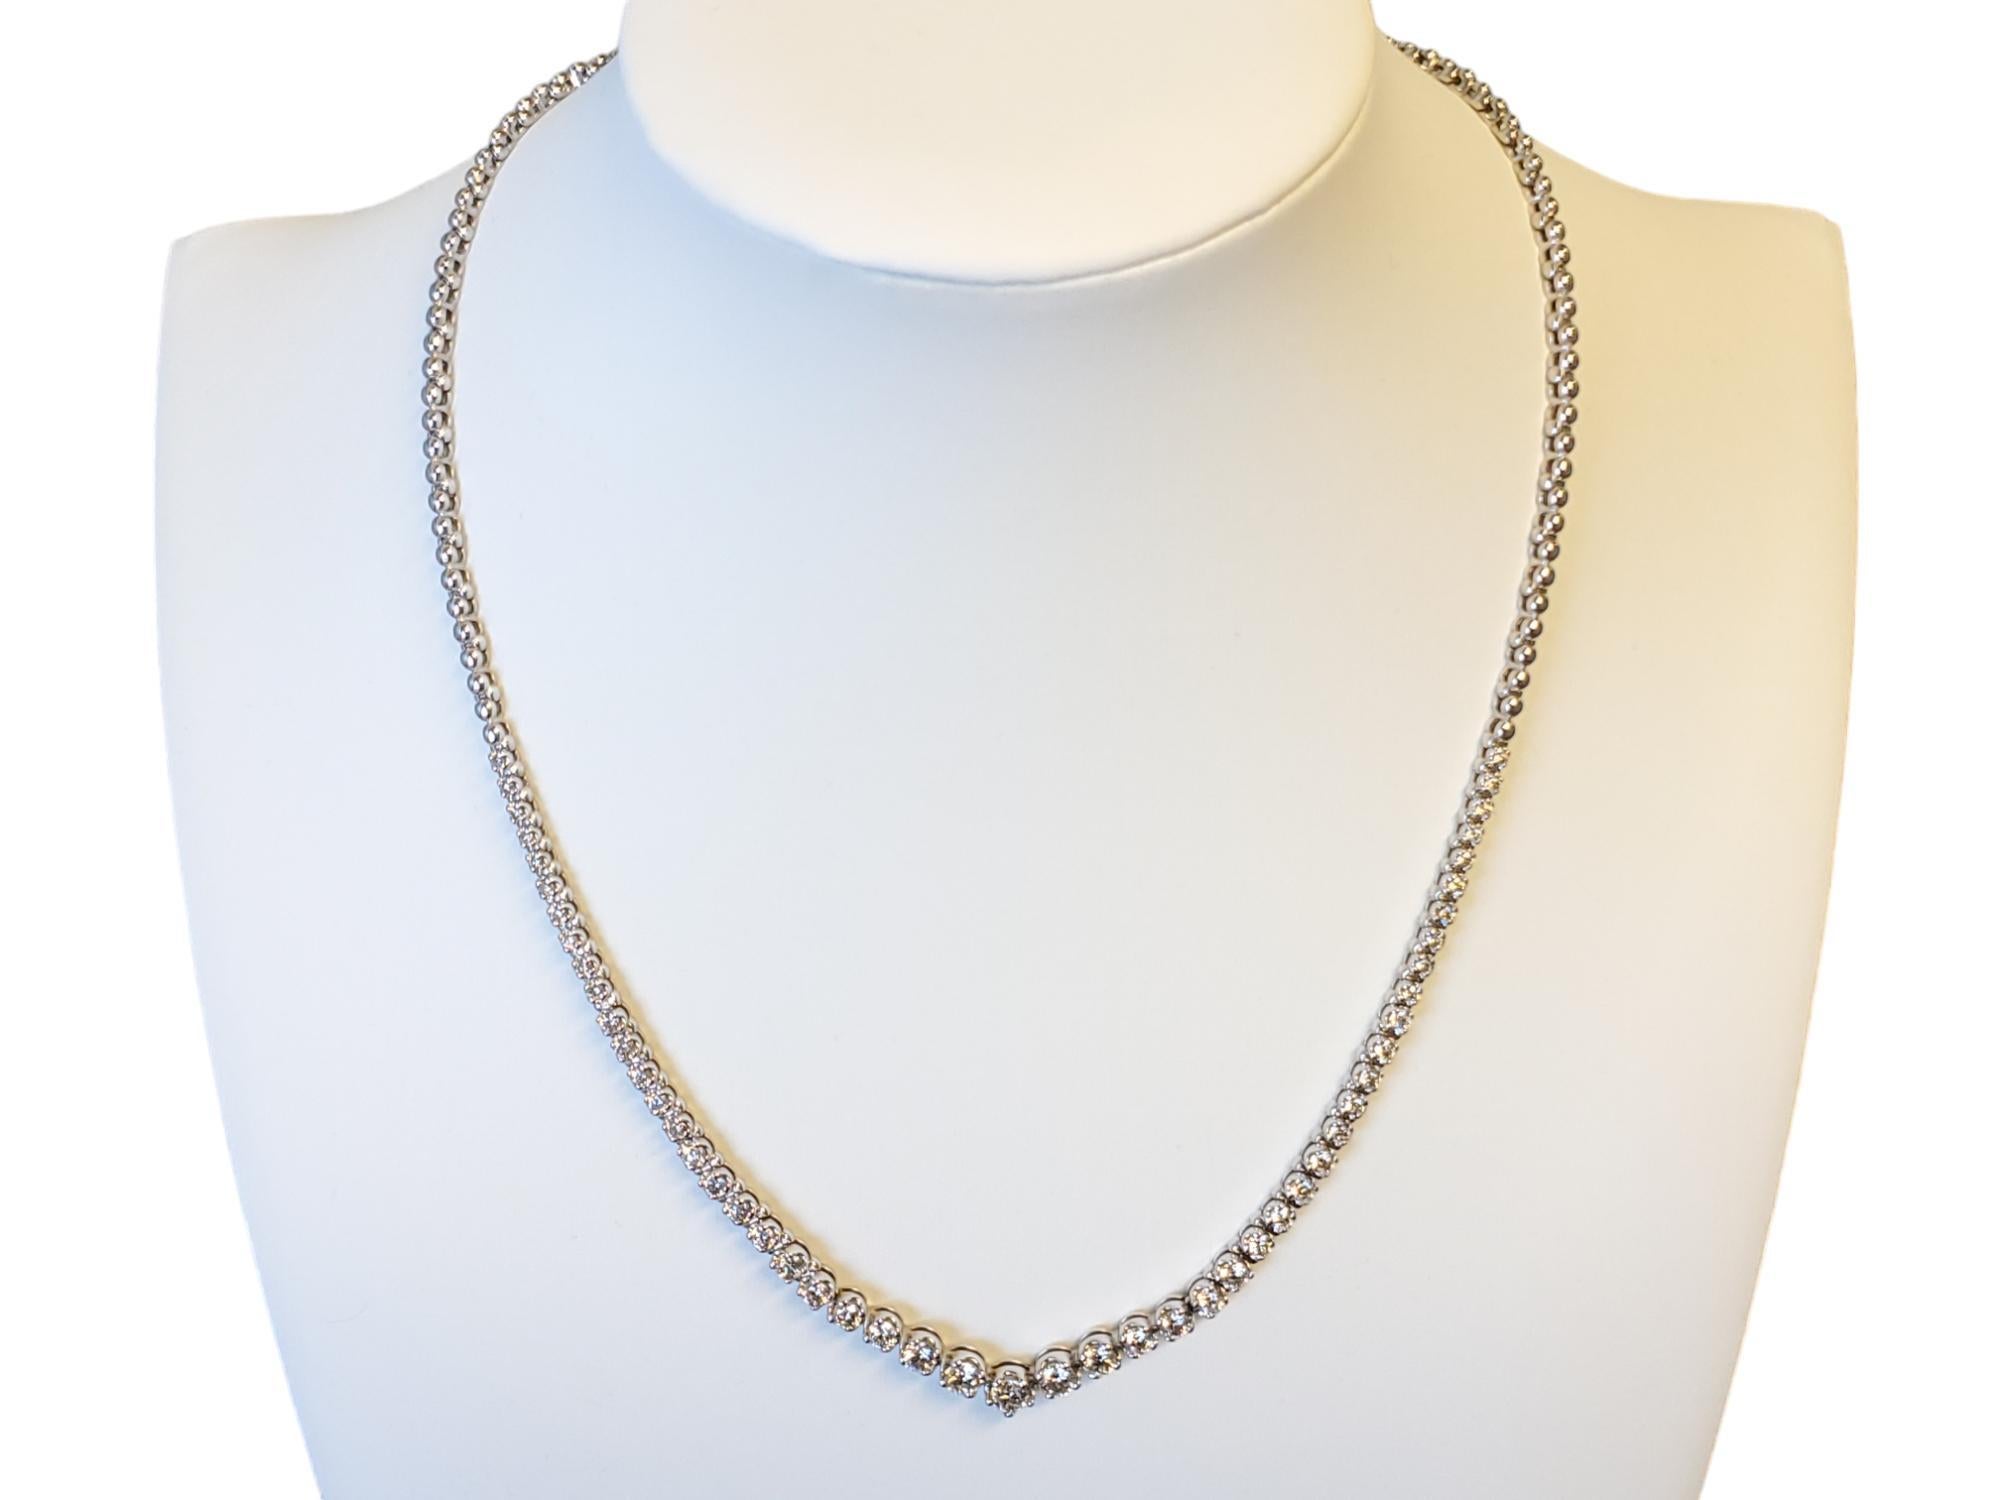 Riviera Necklace 10k White Gold 4tcw Natural Diamonds

Listed is this gorgeous riviera necklace in fabulous condition. This was very lightly worn, and features natural round brilliant diamonds starting at .33ct in the center and tapering all the way